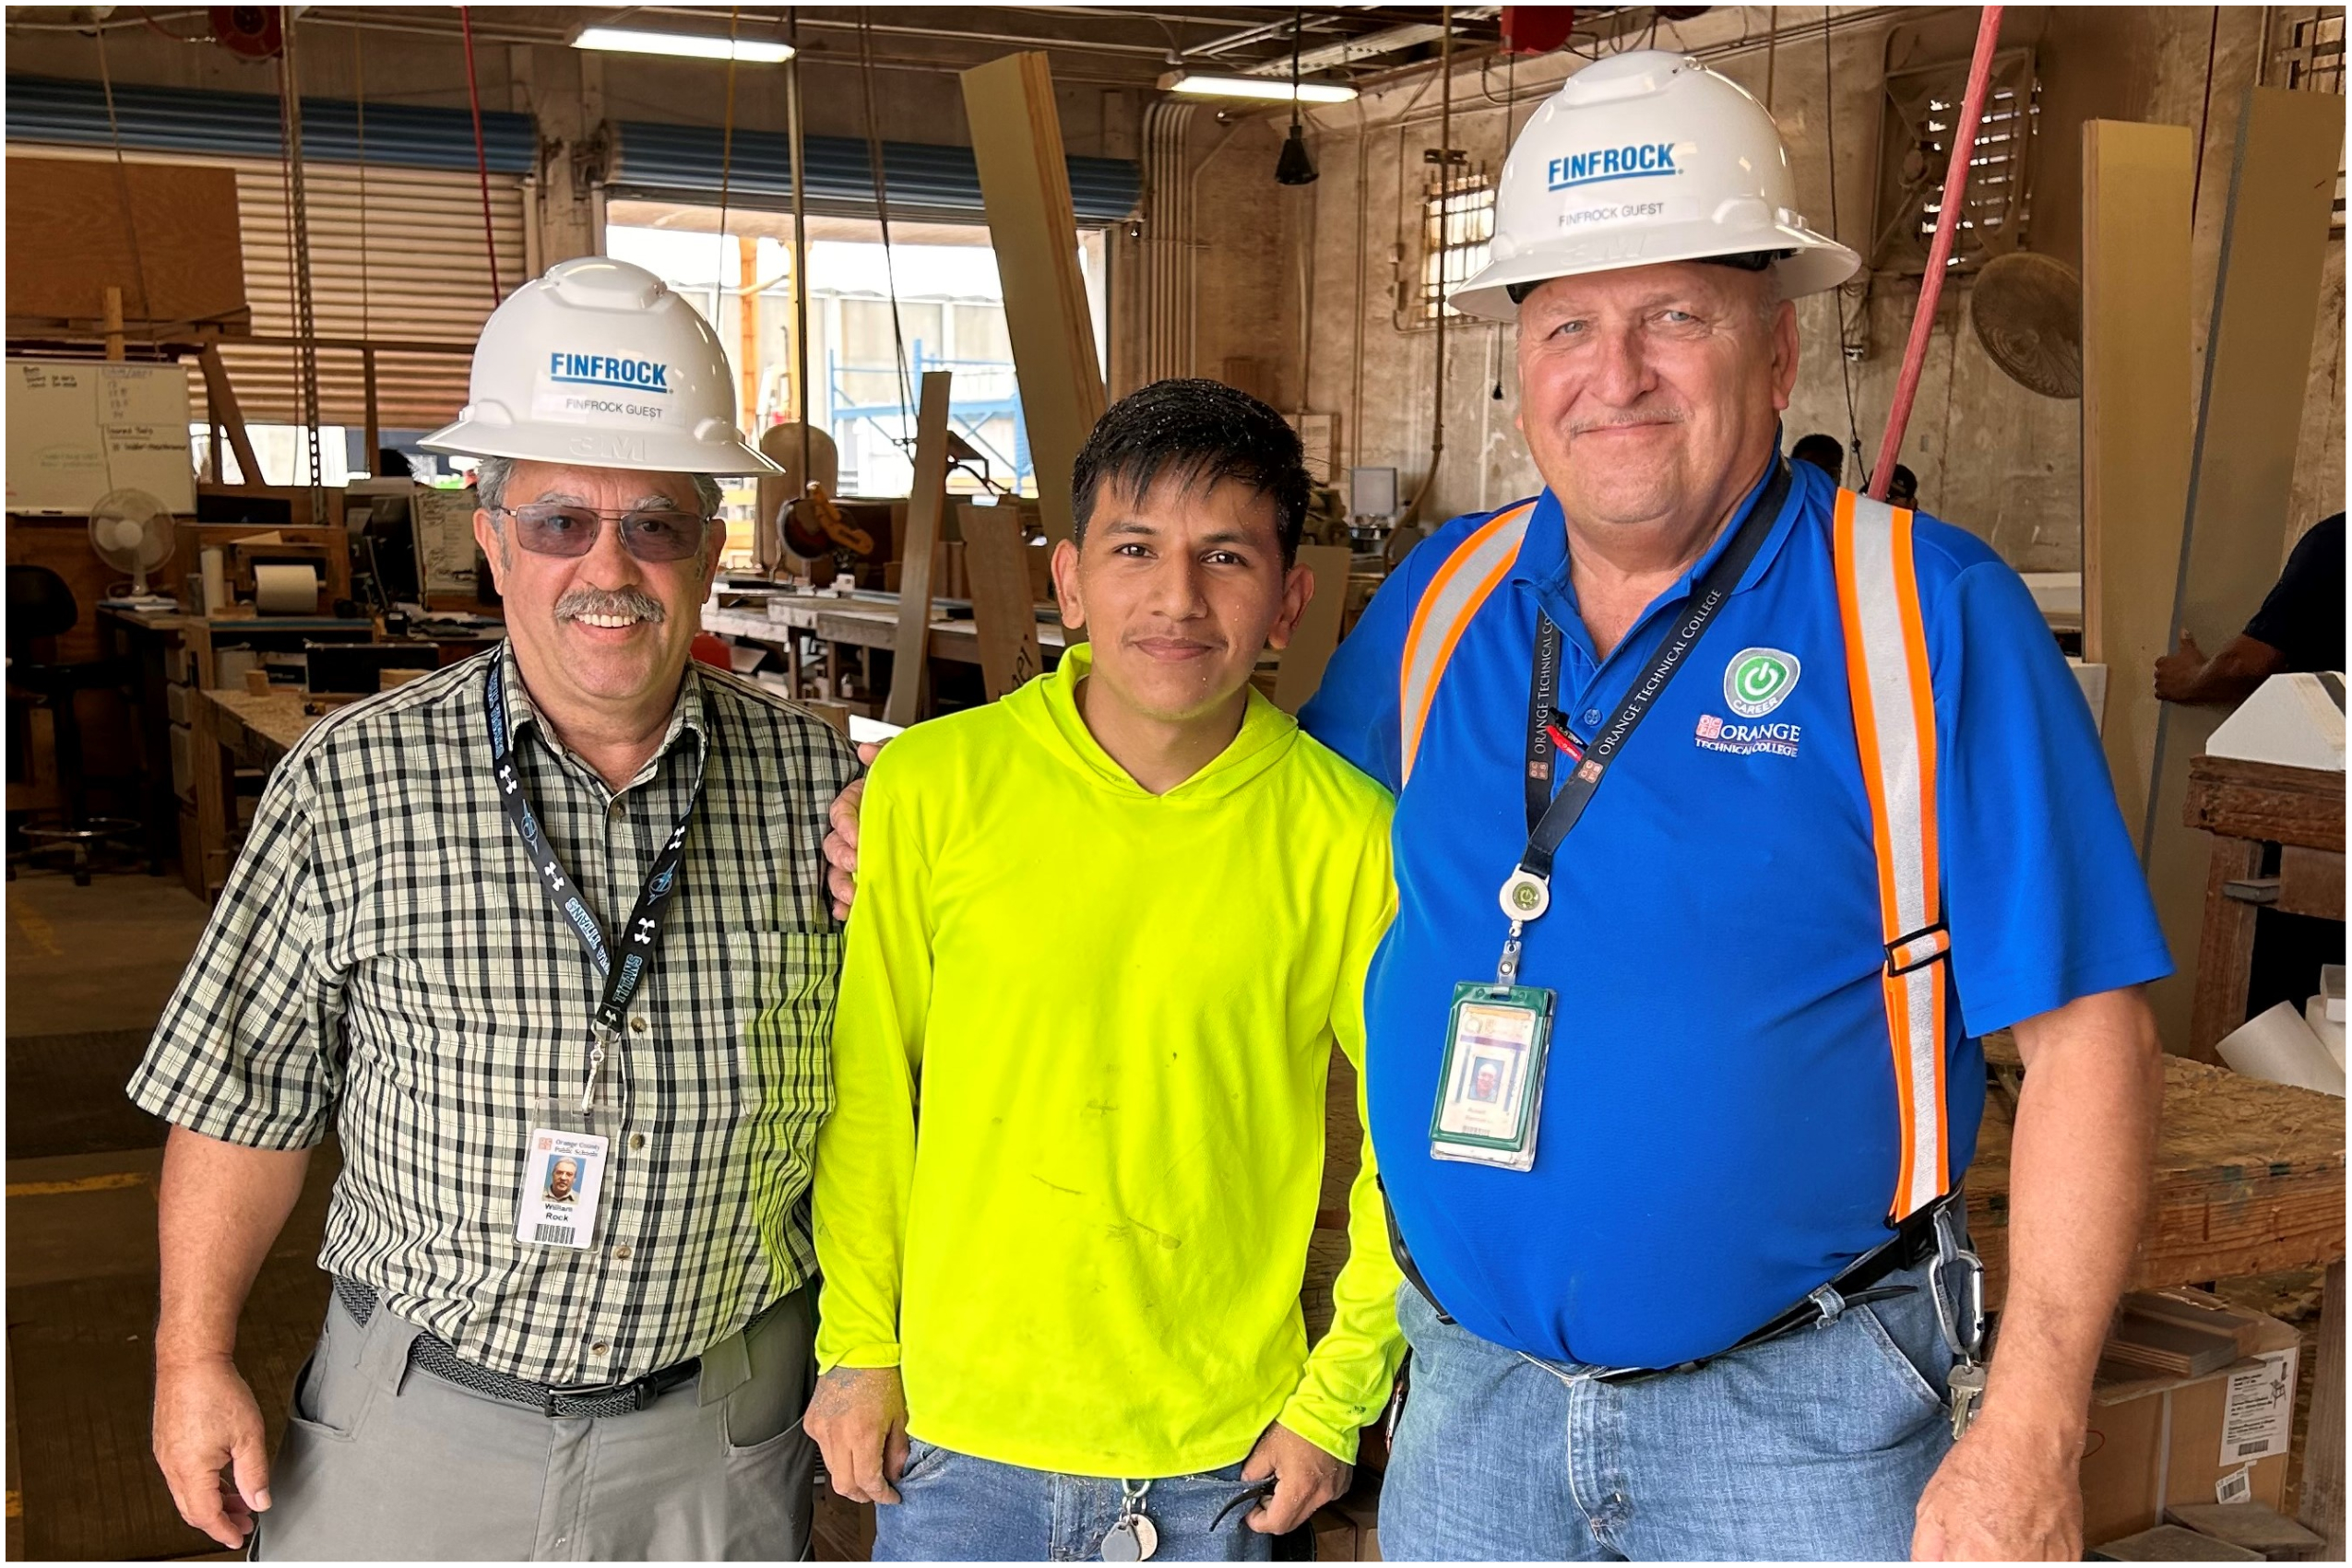 Youth program chaperones pose with FINFROCK carpentry apprentice